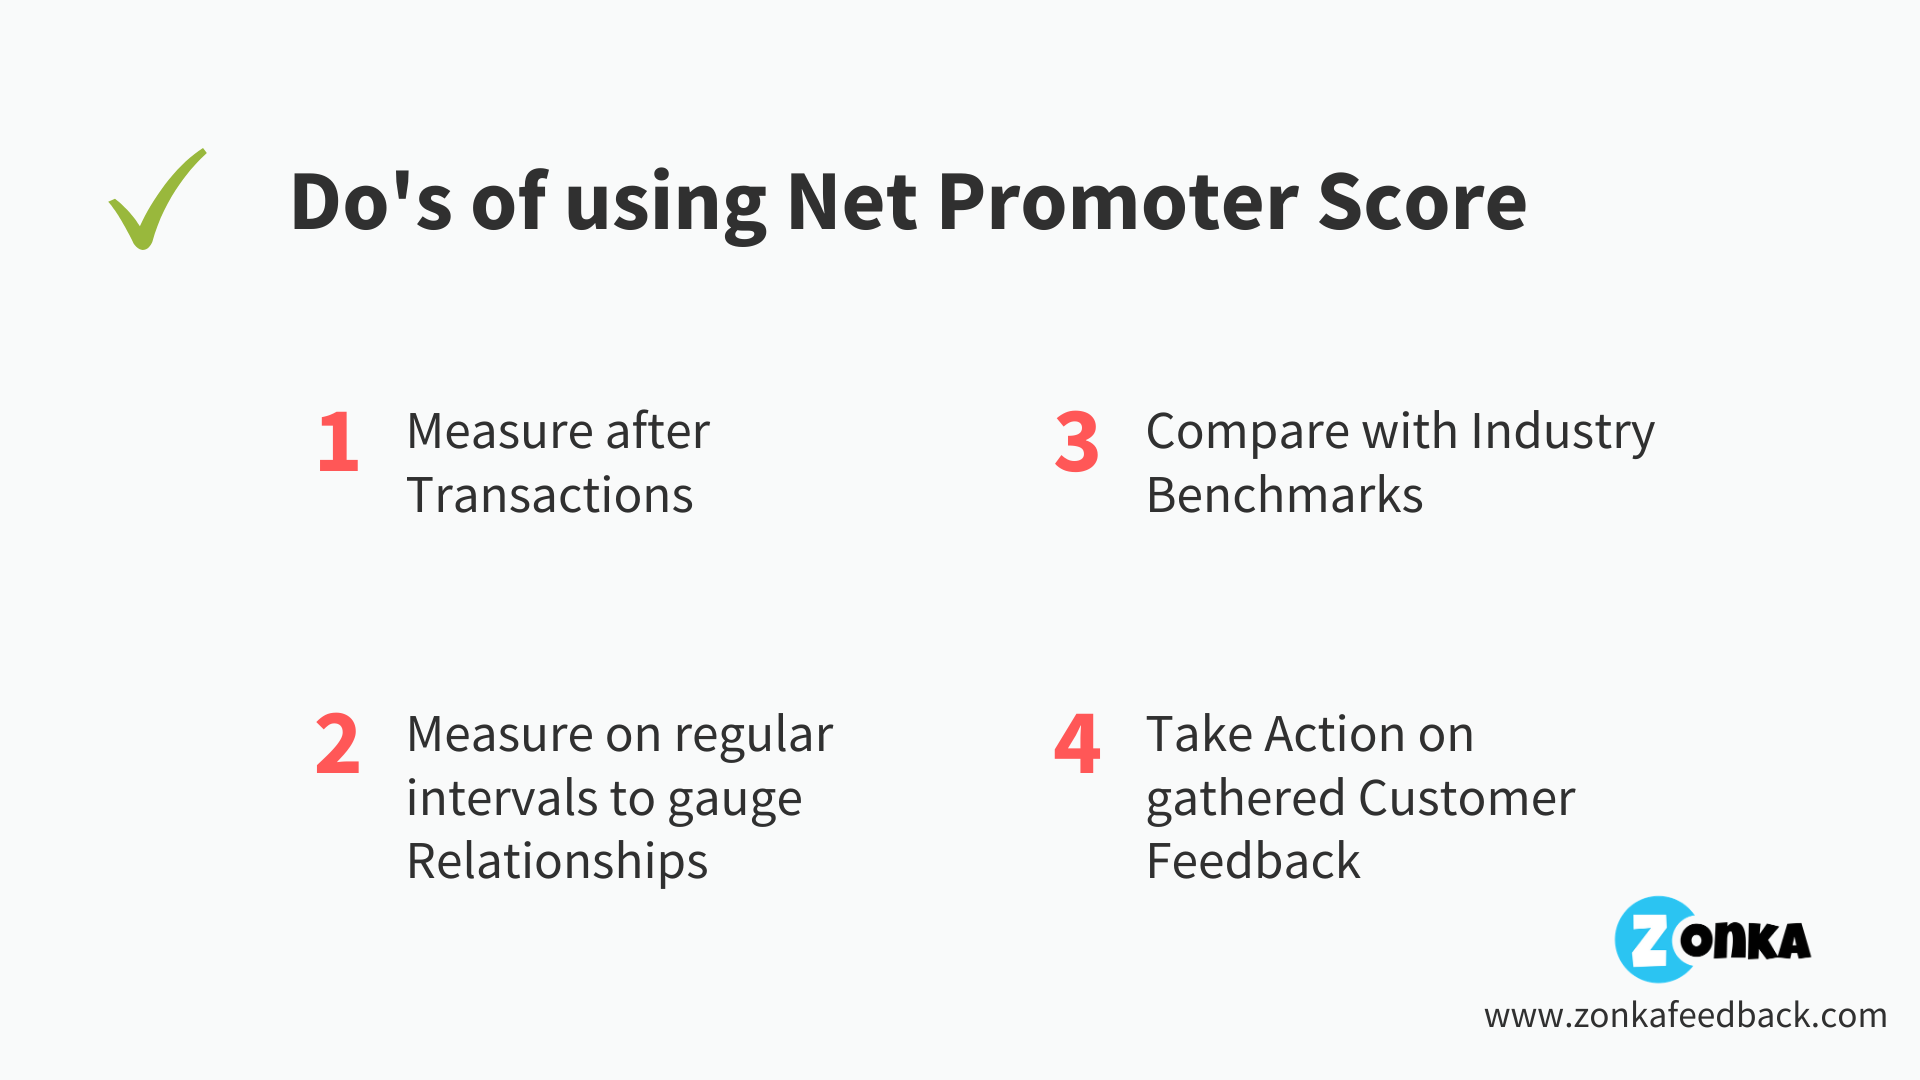 dos-of-net-promoter-score